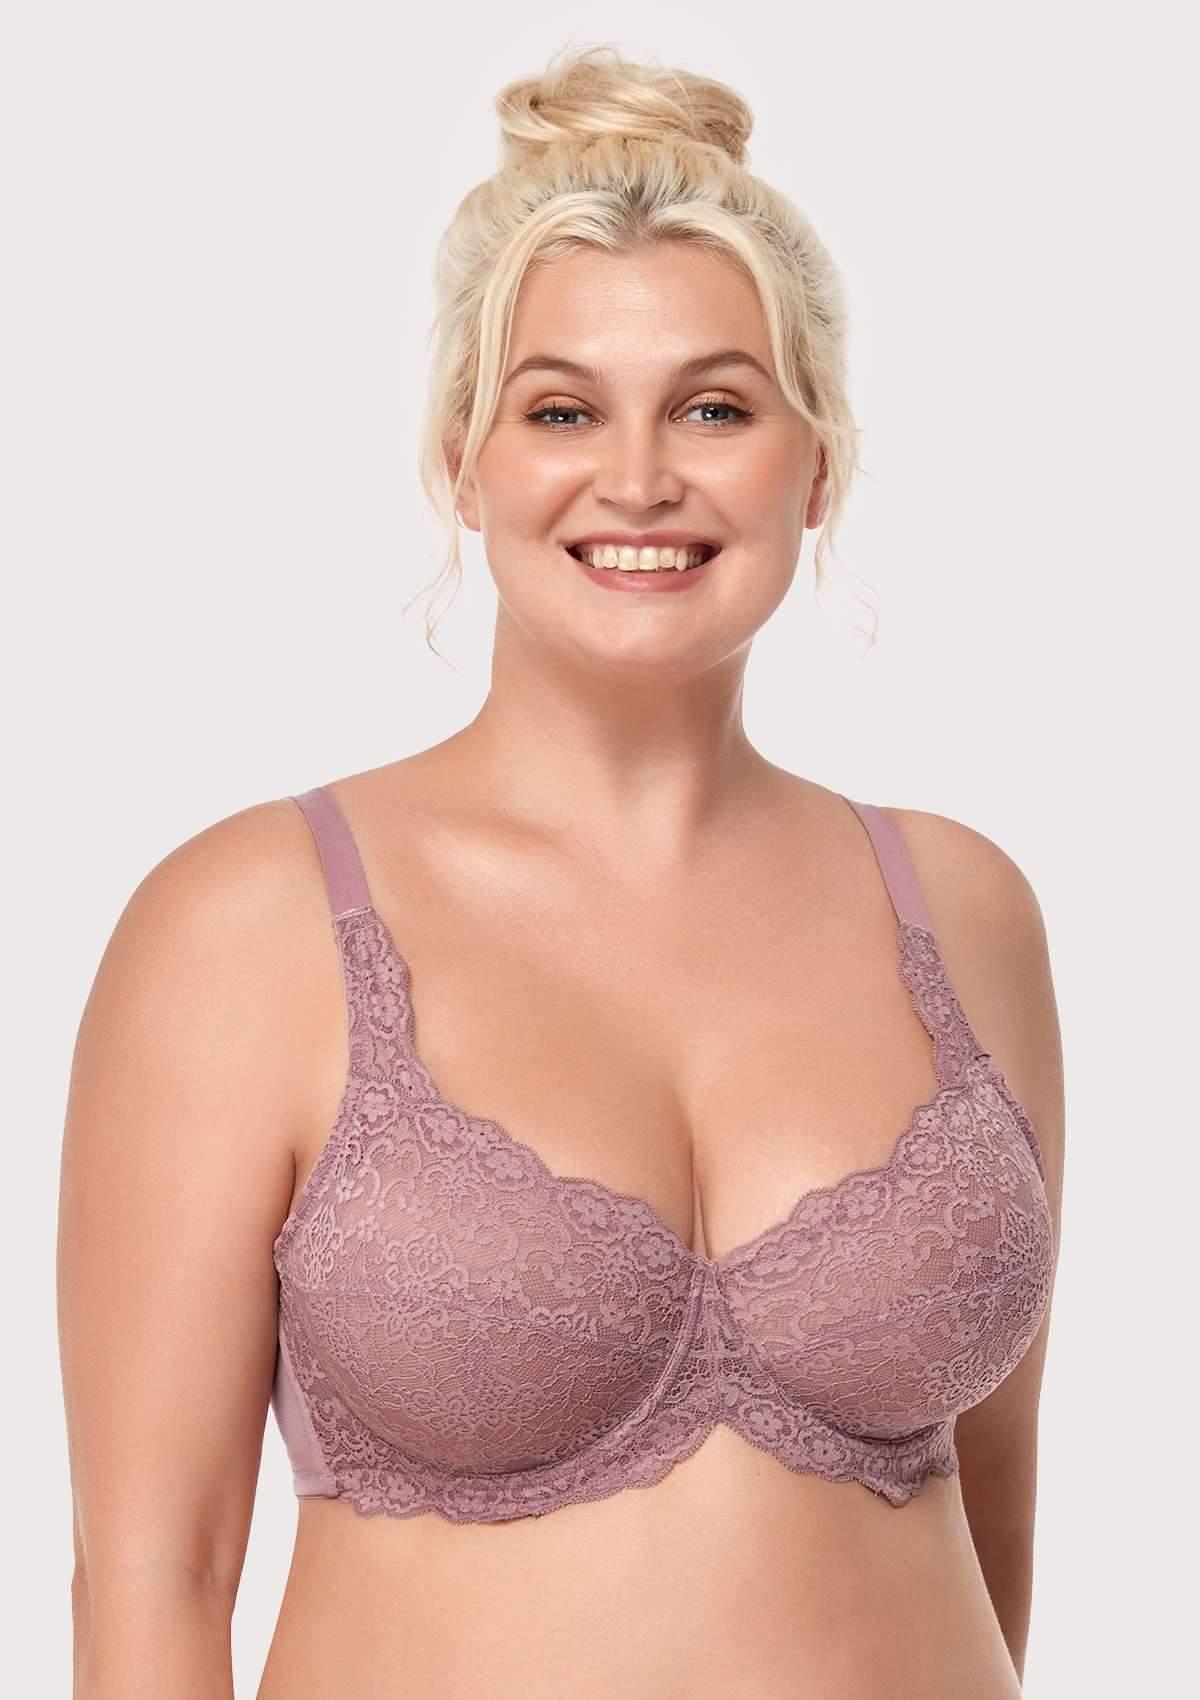 HSIA All-Over Floral Lace Unlined Bra: Minimizer Bra For Heavy Breasts - Purple / 40 / DDD/F